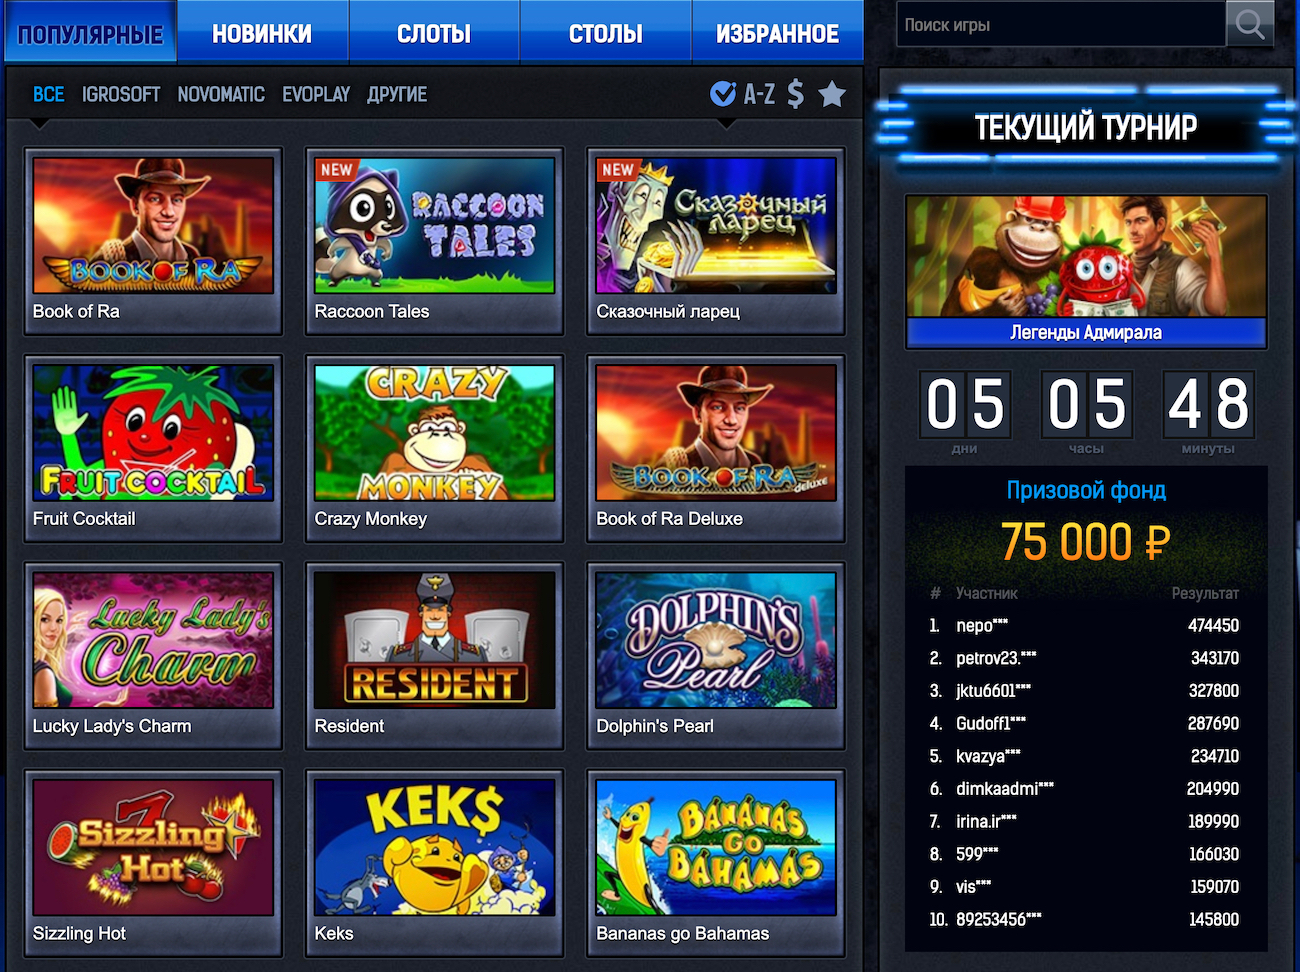 Finn And The Swirly Spin Touch slot online cassino gratis